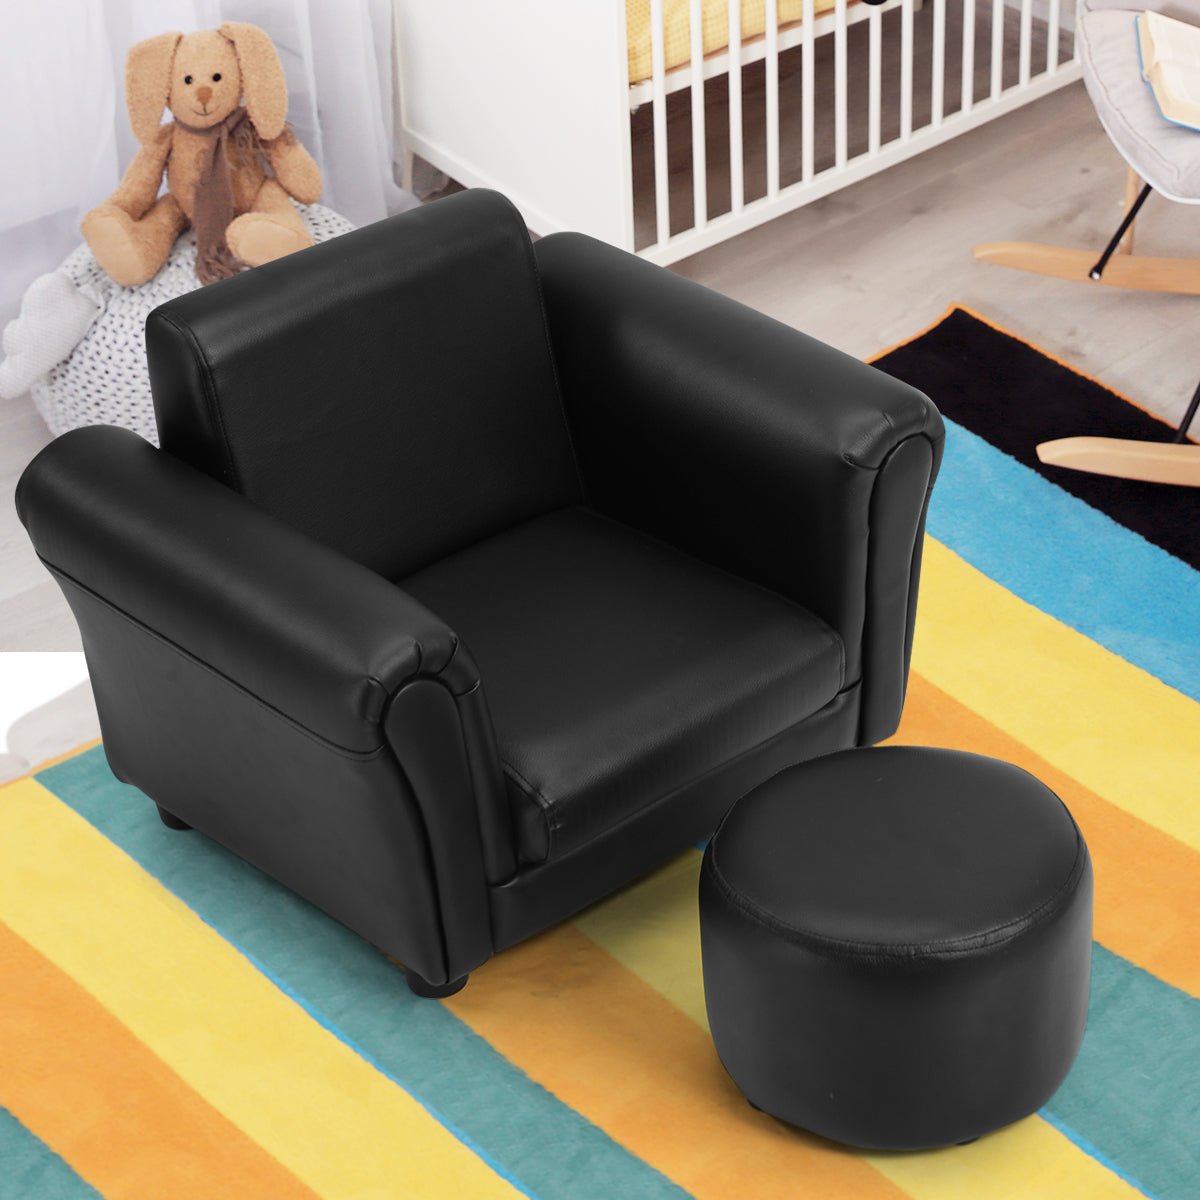 Baby and Children's Comfortable Sofa with Footstool - Ergonomic Design